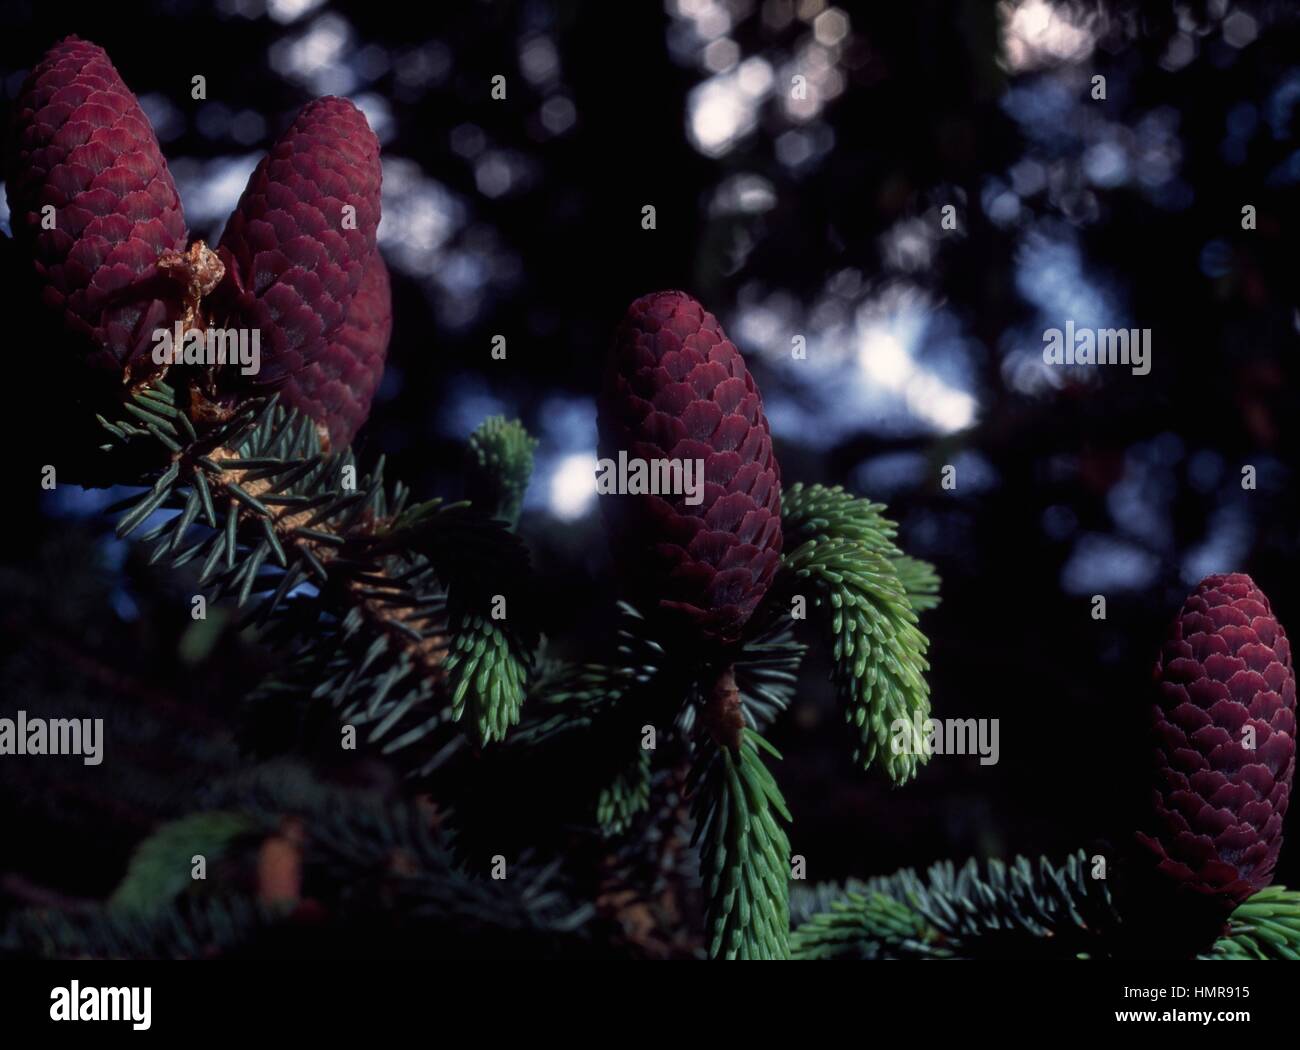 Likiang spruce cones (Picea likiangensis), Pinaceae. Stock Photo